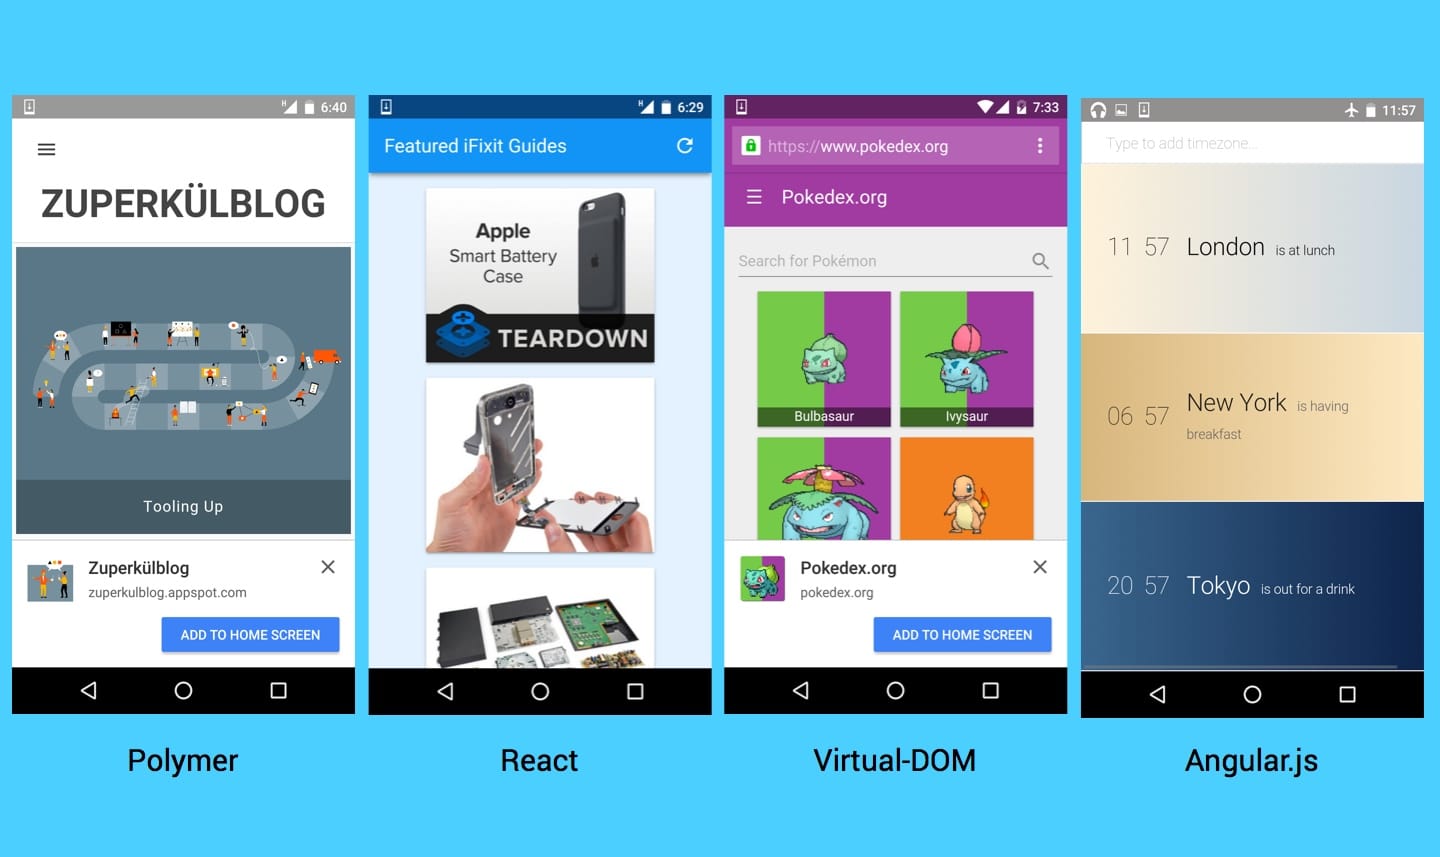 Progressive web apps implemented using React, Polymer, Virtual DOM and AngularJS